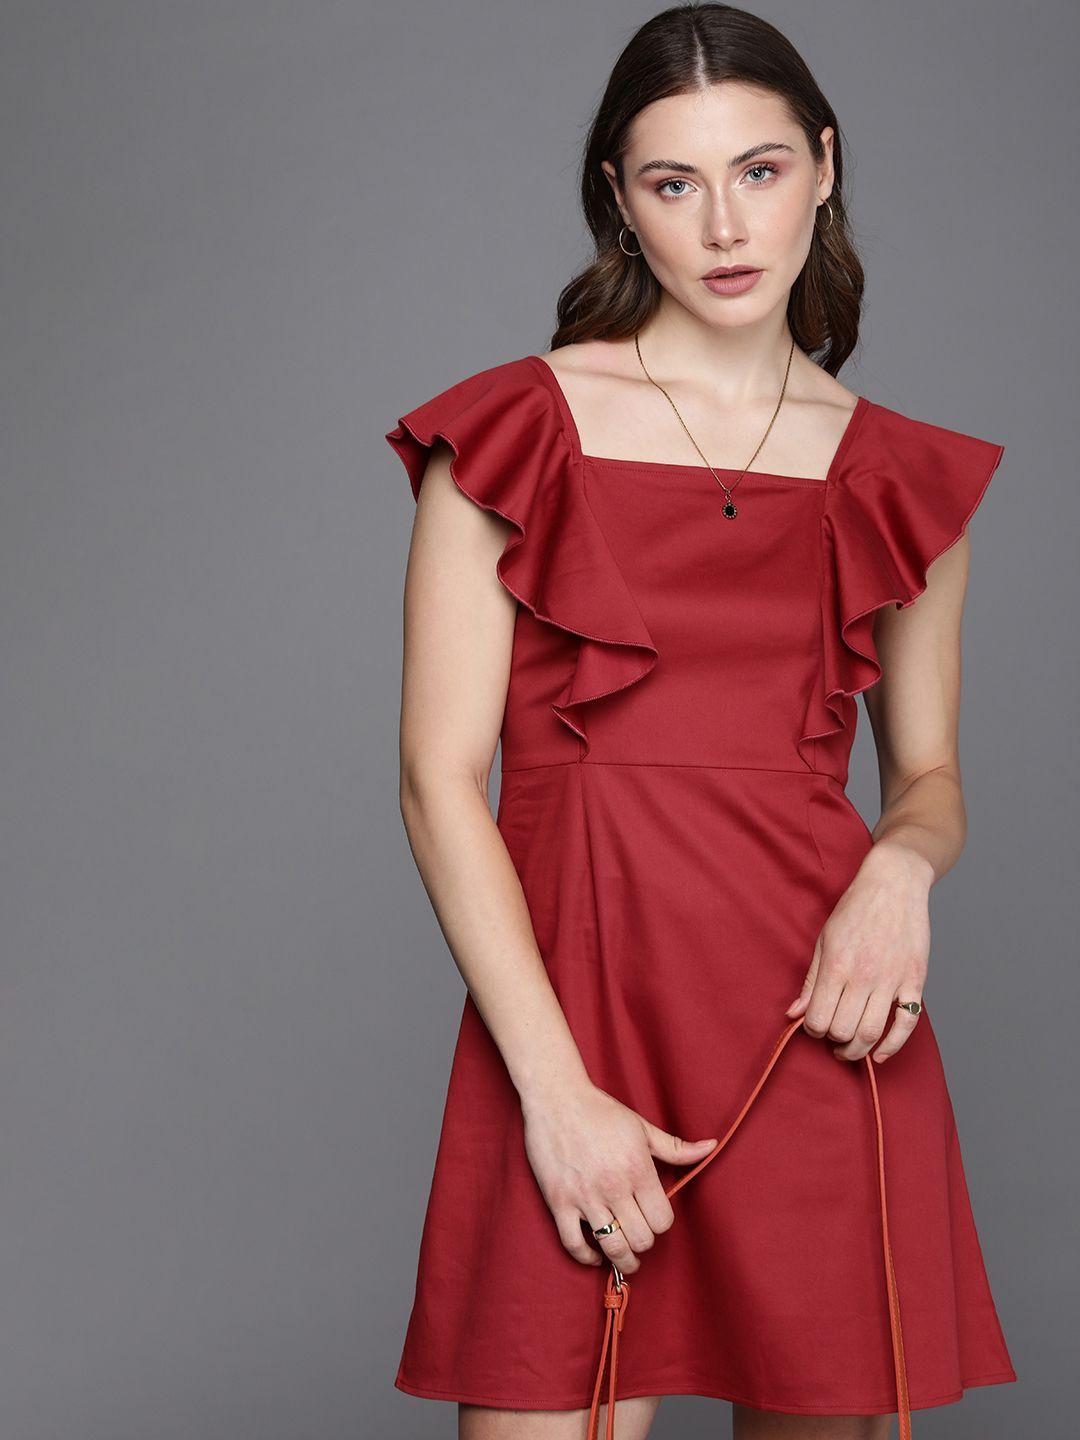 kenneth-cole-vivacious-women-rust-red-satin-finish-flutter-sleeve-ruffled-a-line-dress